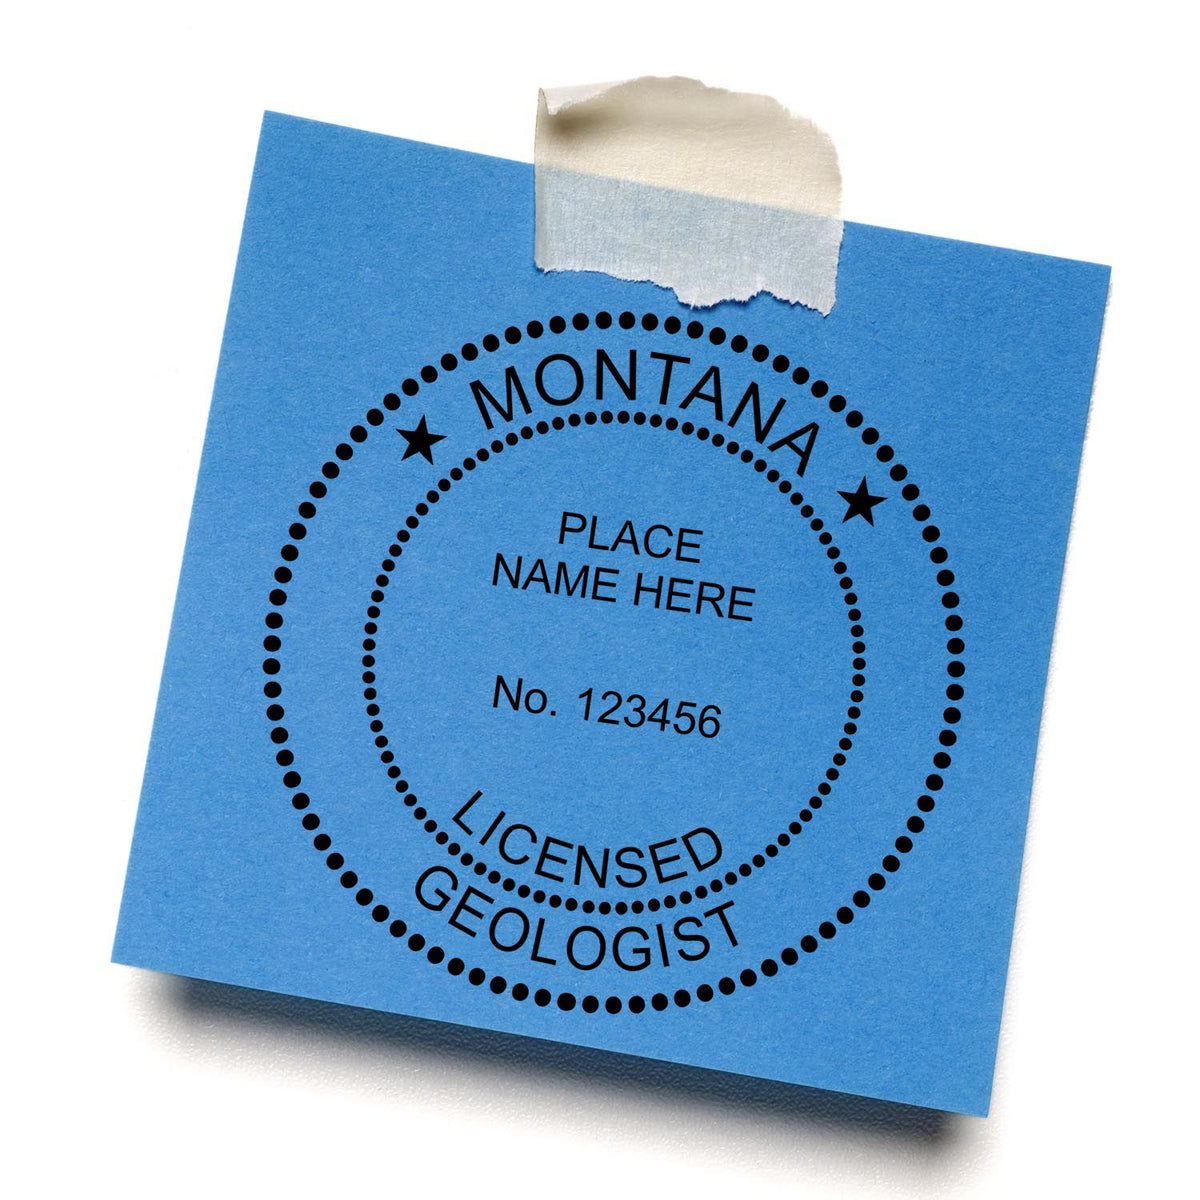 A lifestyle photo showing a stamped image of the Self-Inking Montana Geologist Stamp on a piece of paper